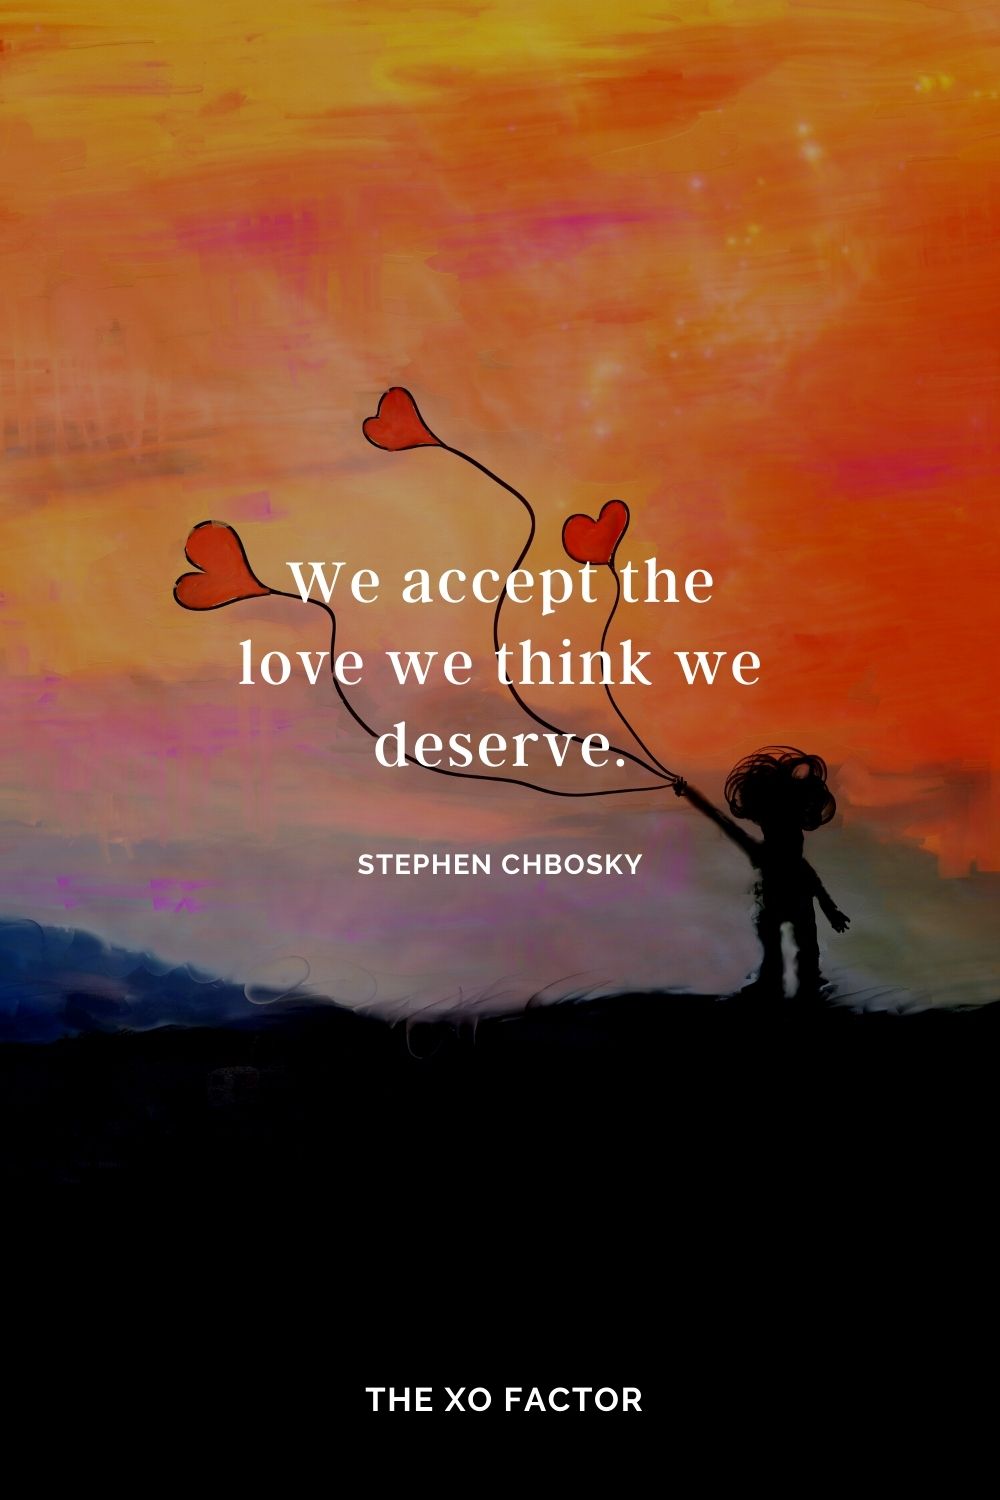 We accept the love we think we deserve. Stephen Chbosky